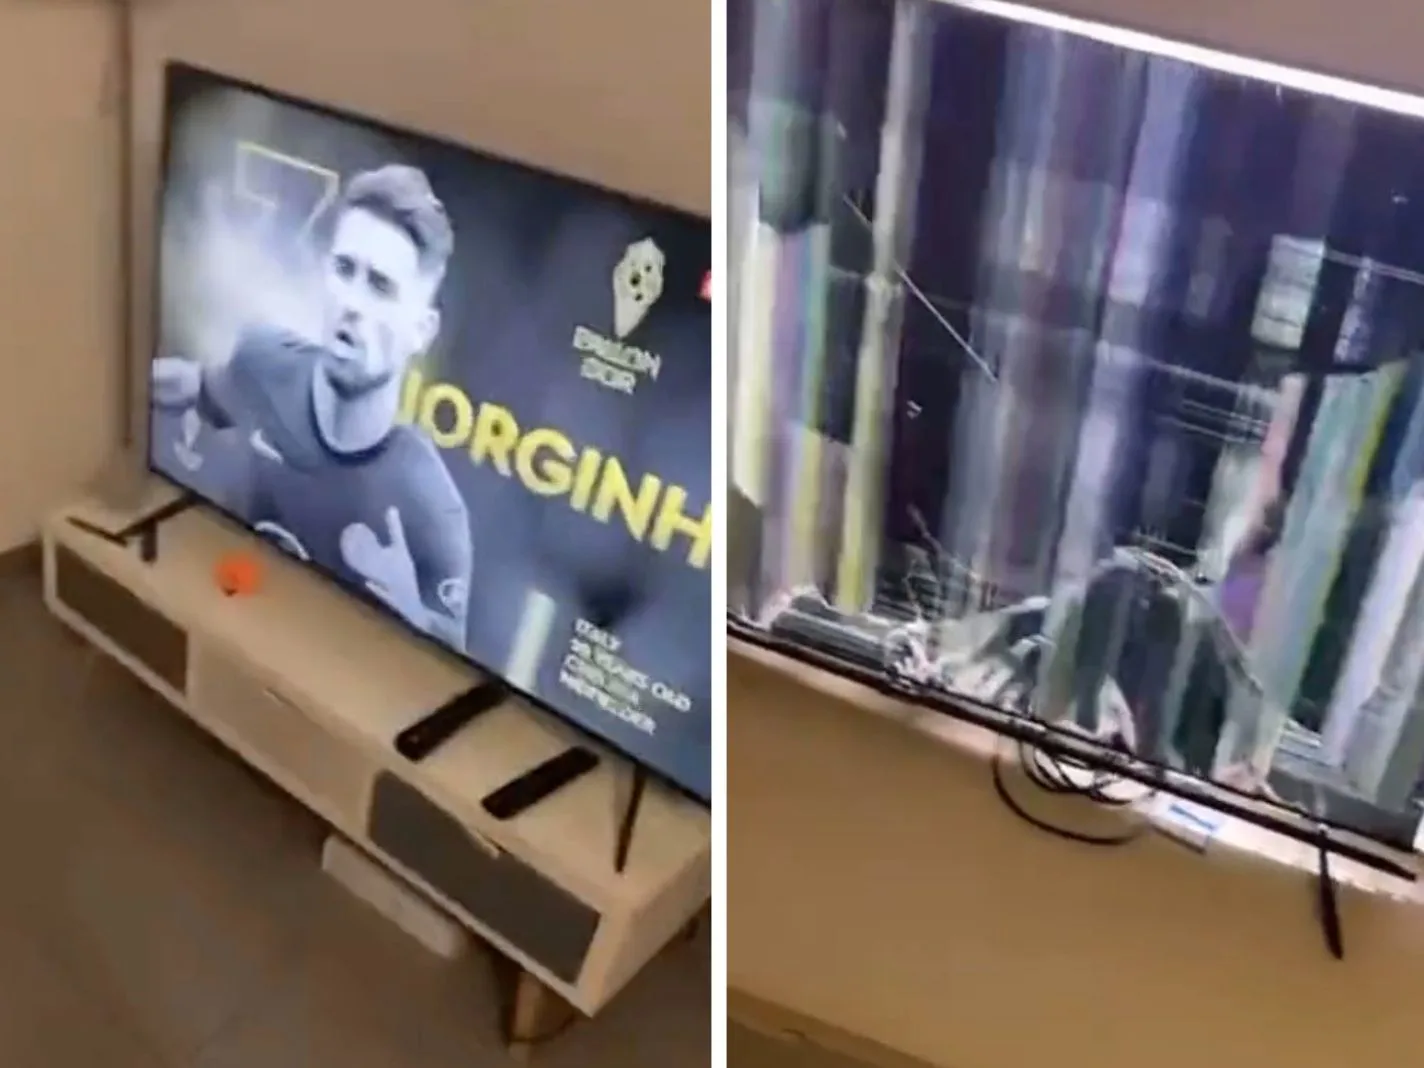 Karim Benzema fan smashes TV in fit of rage after Jorginho comes 3rd in Ballon d'Or ranking